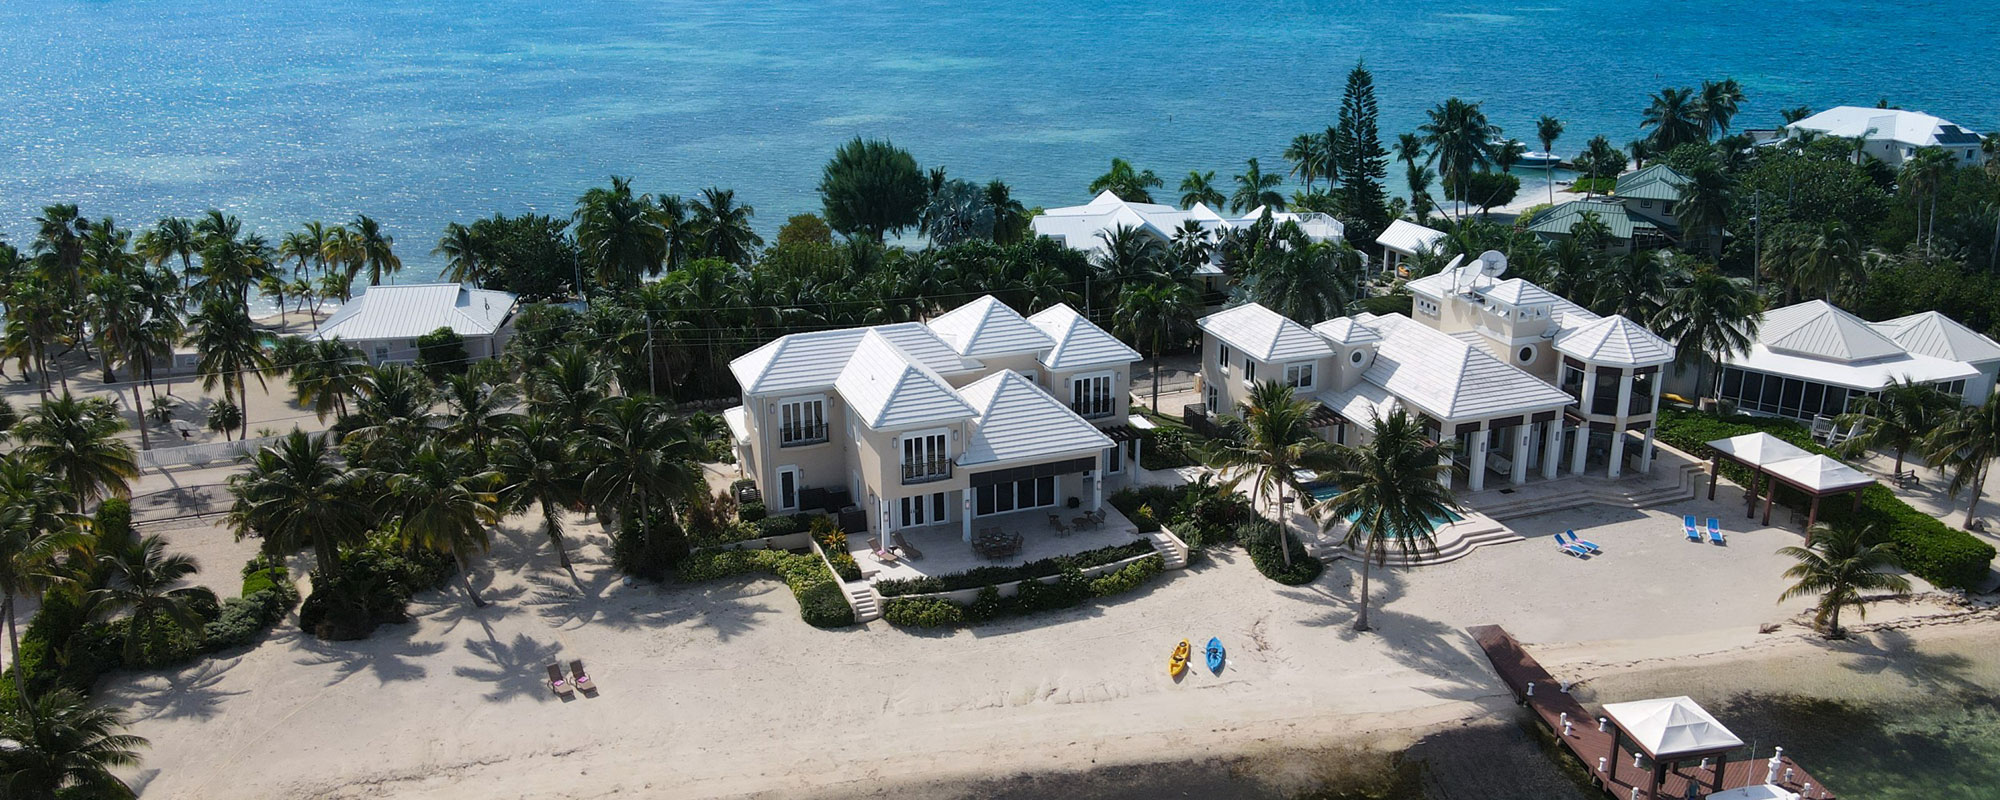 3 Best Locations to Buy a Vacation Home in the Cayman Islands